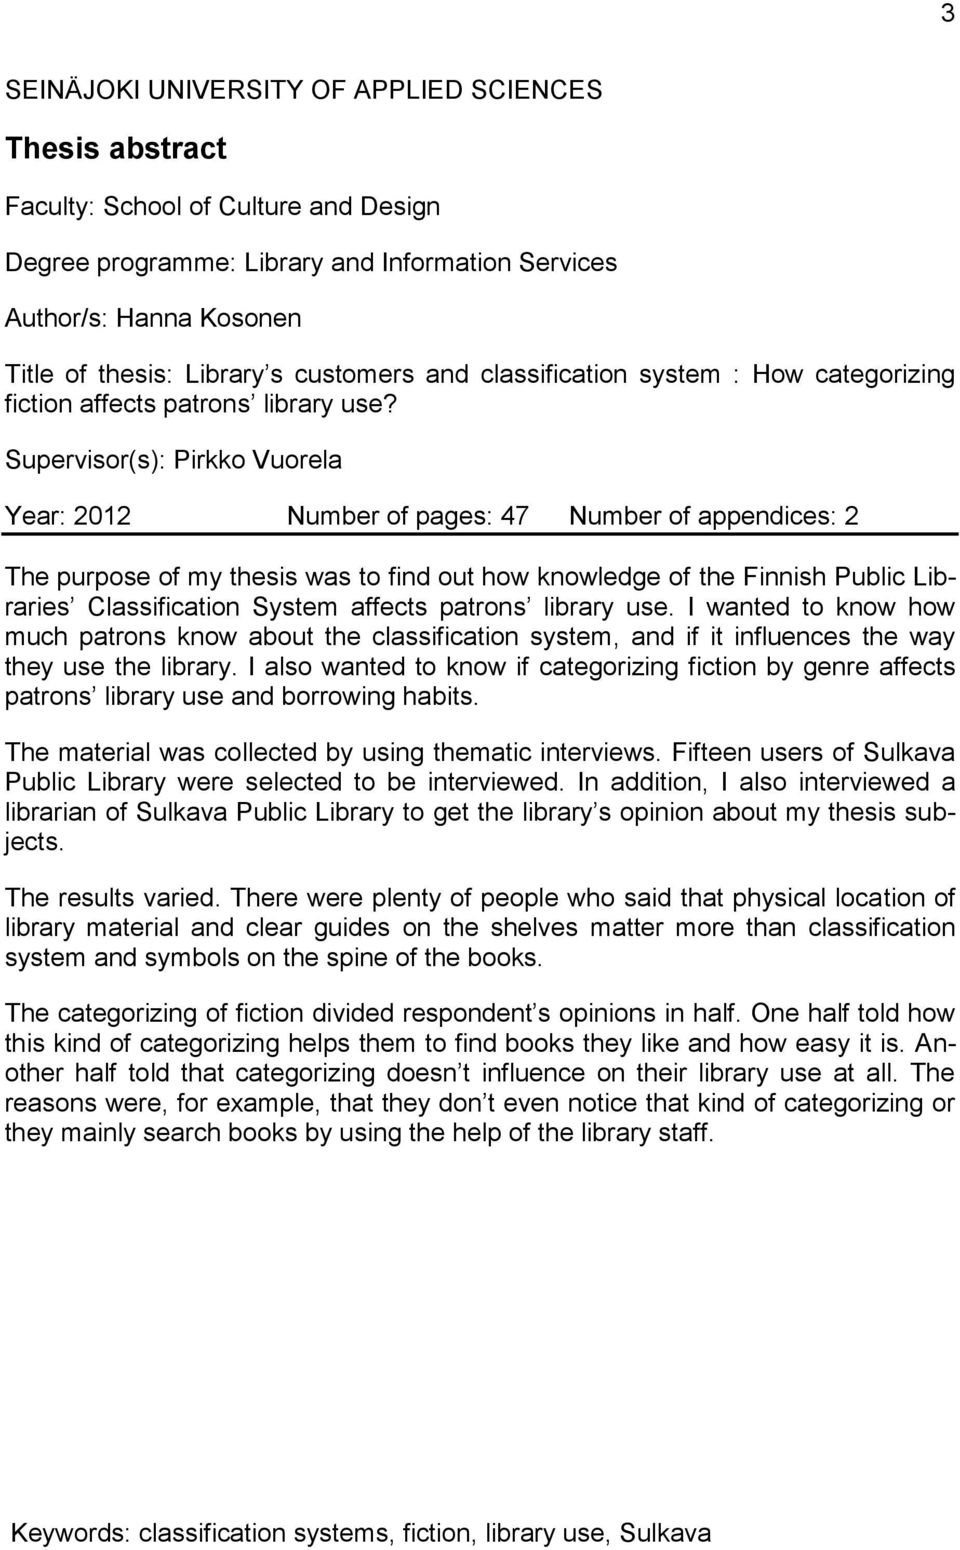 Supervisor(s): Pirkko Vuorela Year: 2012 Number of pages: 47 Number of appendices: 2 The purpose of my thesis was to find out how knowledge of the Finnish Public Libraries Classification System